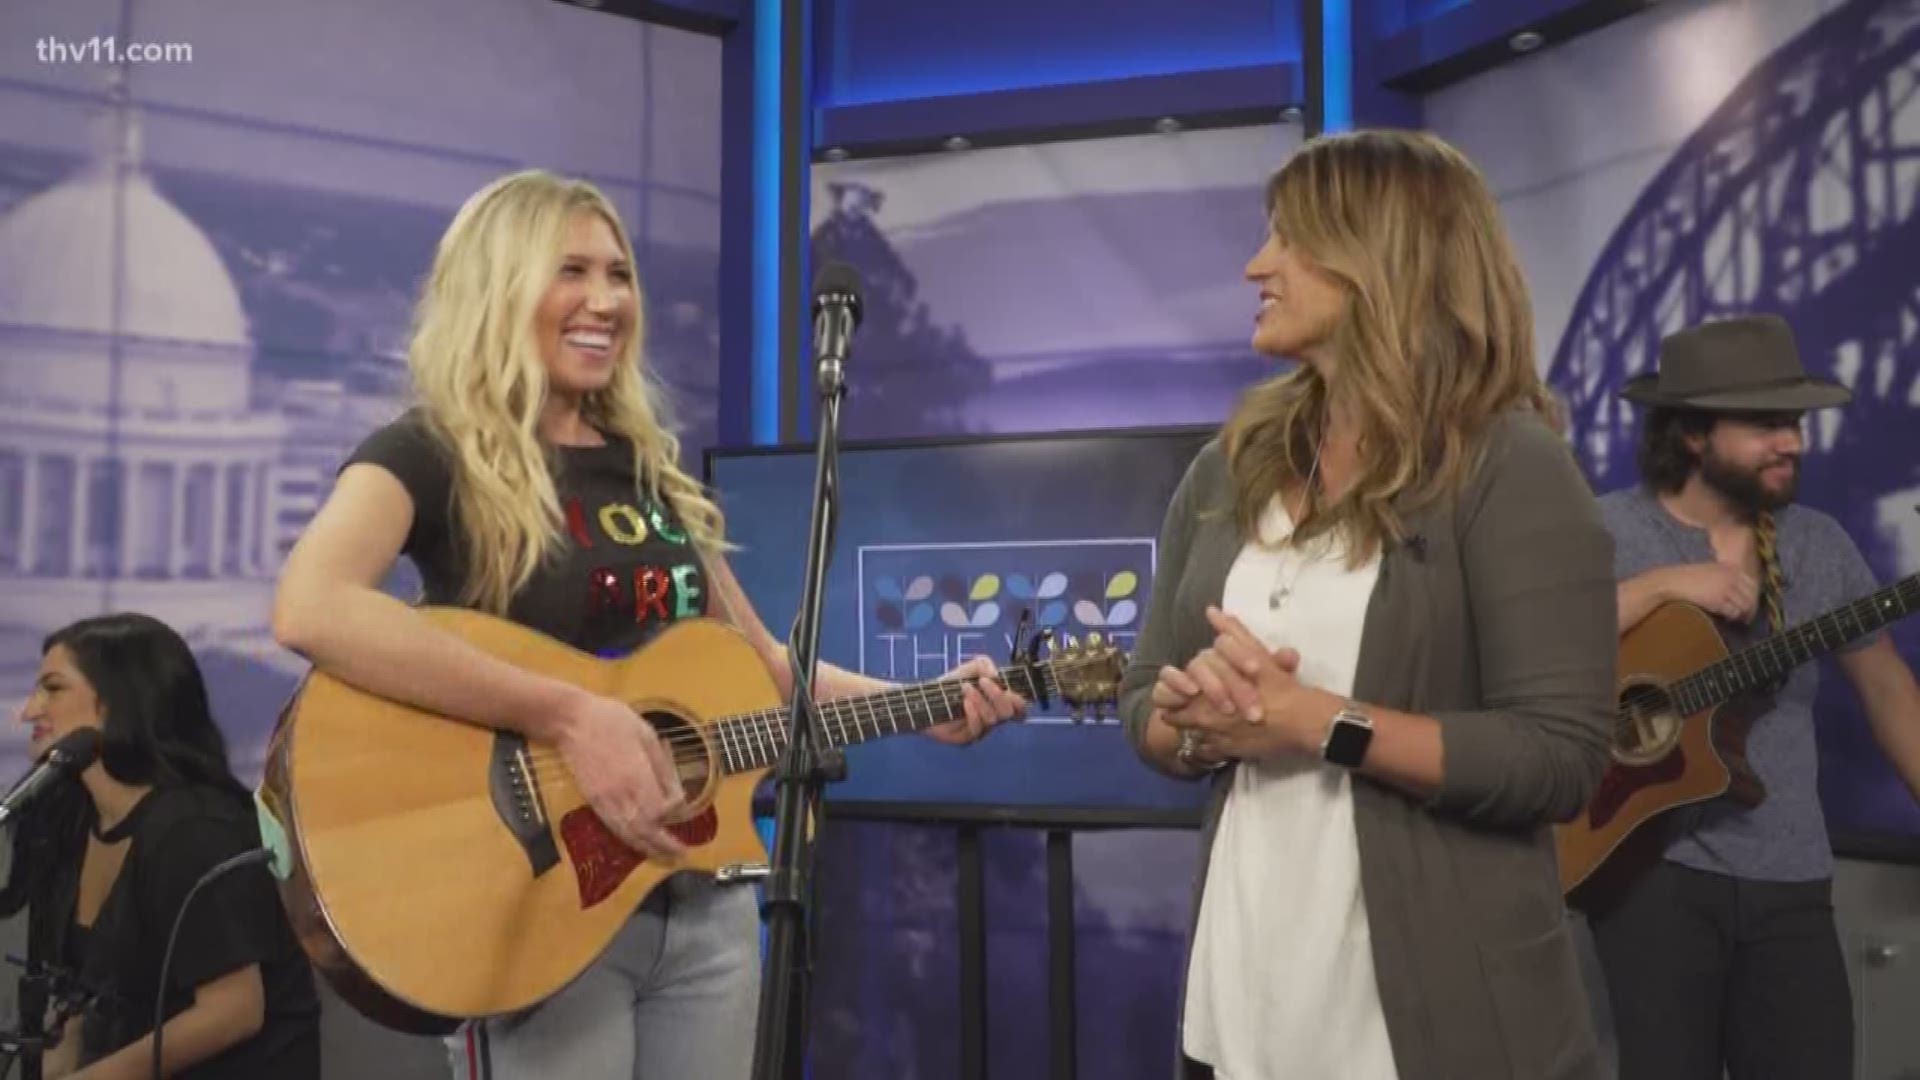 Singer-songwriter Bailey Hefley performs on Arkansas lifestyle show "The Vine."